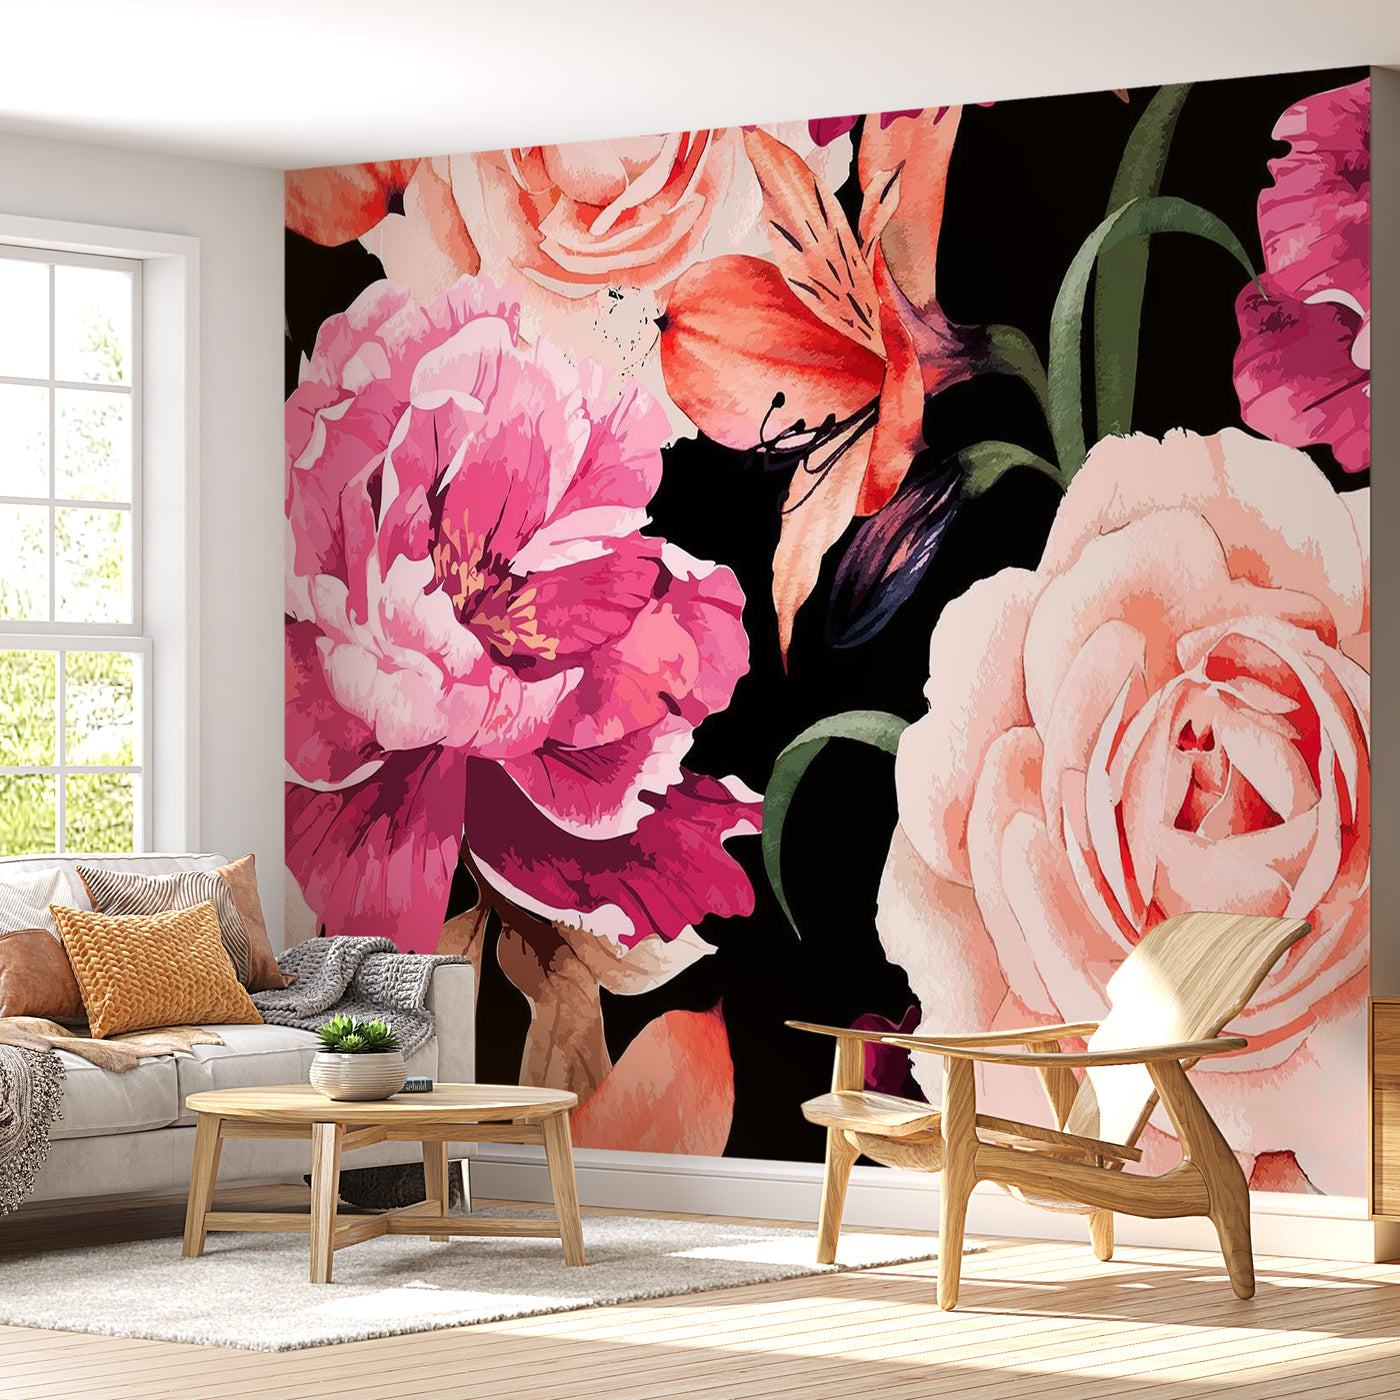 Peel & Stick Floral Wall Mural - Roses Of Love - Removable Wall Decals